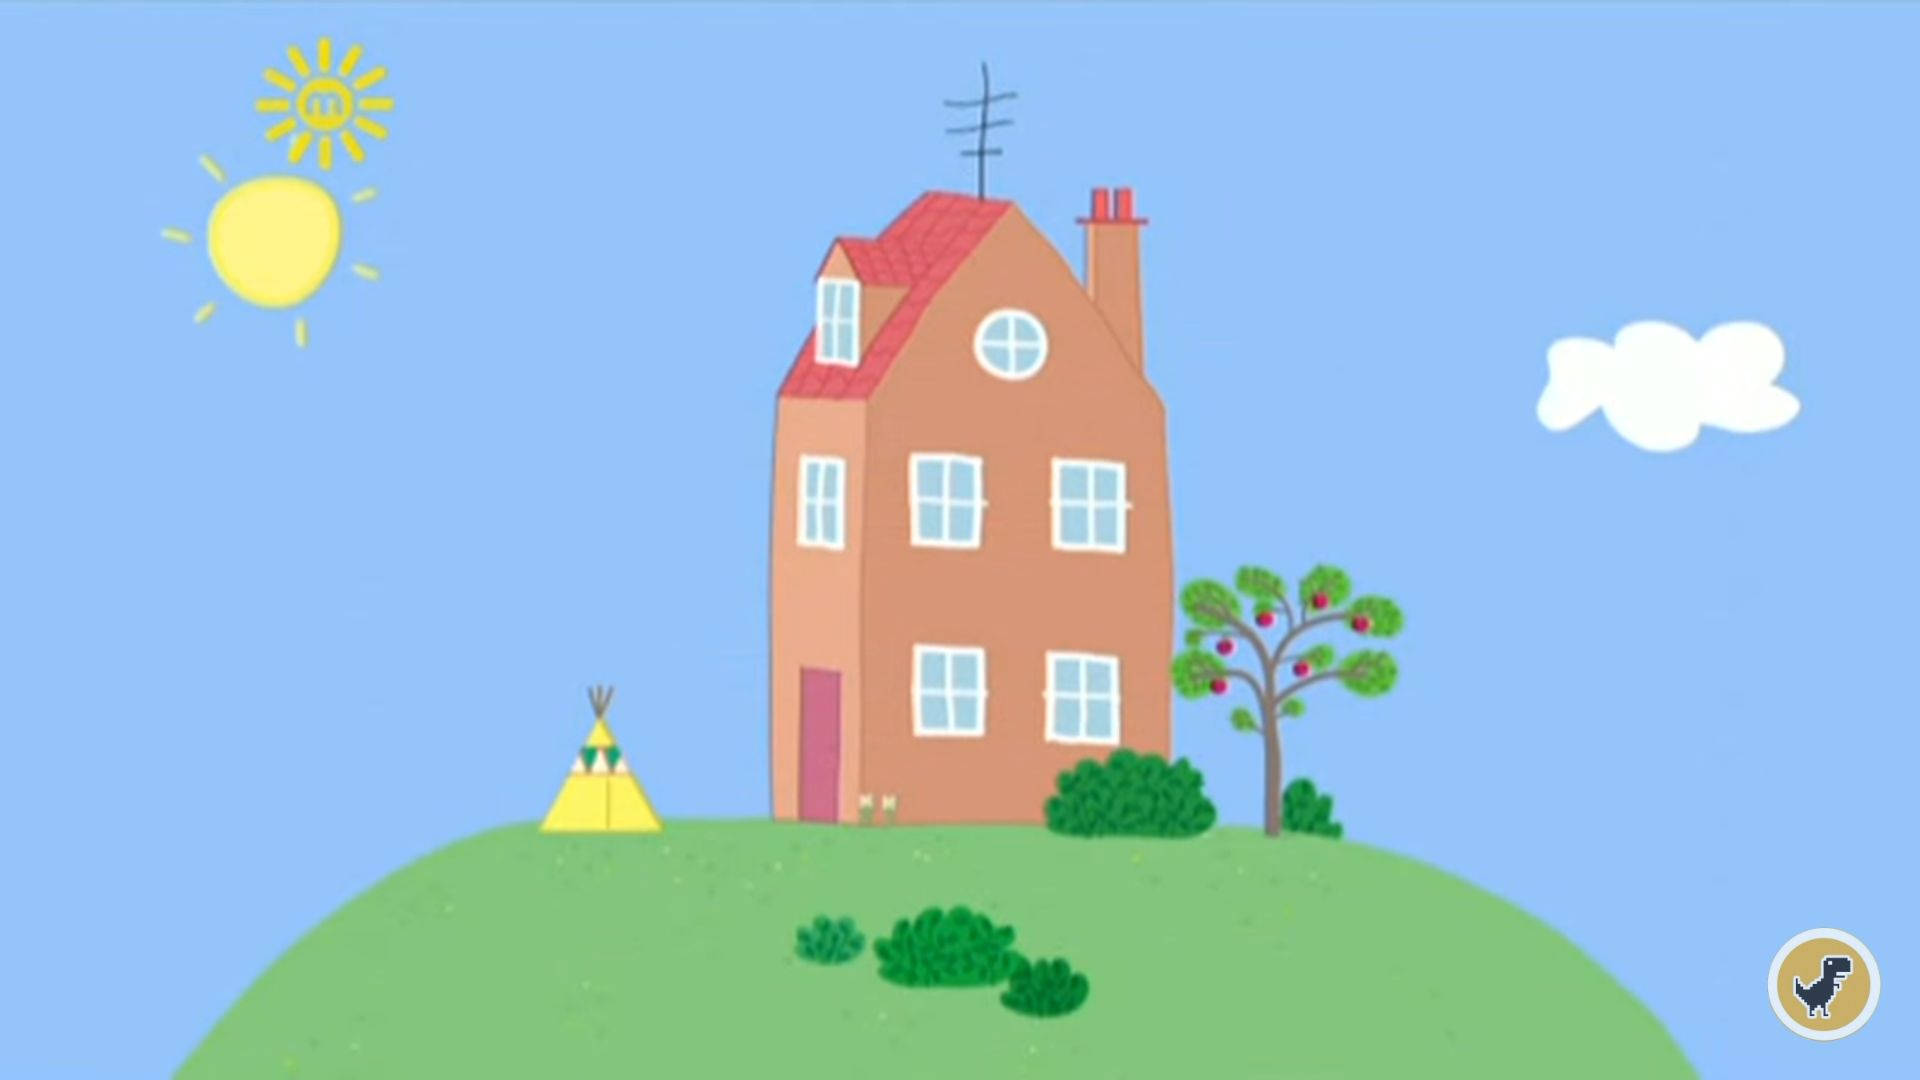 Red Peppa Pig House Wallpaper